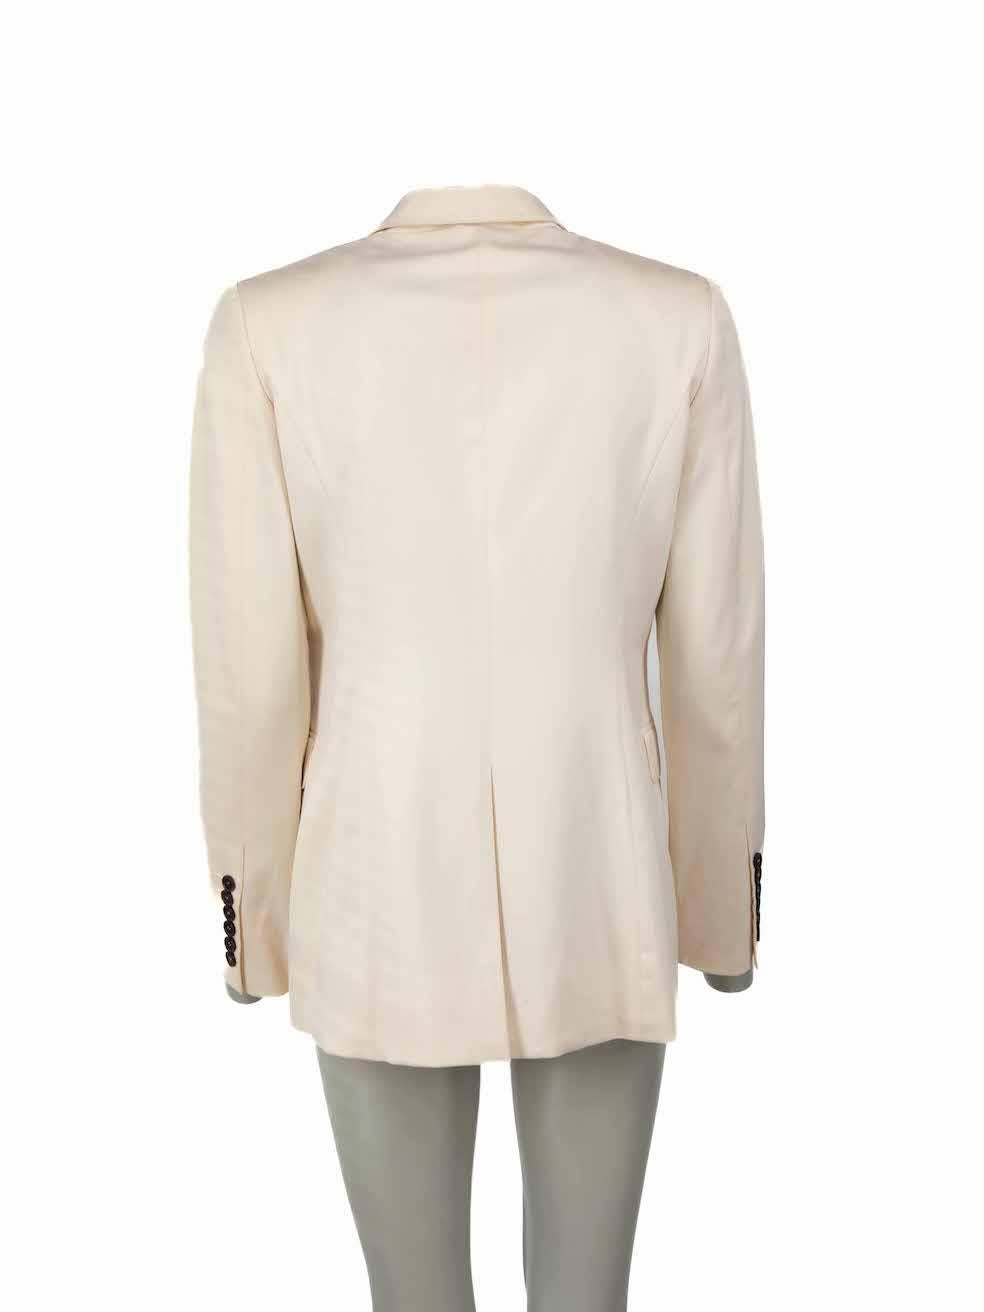 Burberry Burberry Prorsum Cream Wool Single Breast Blazer Size S In Excellent Condition For Sale In London, GB